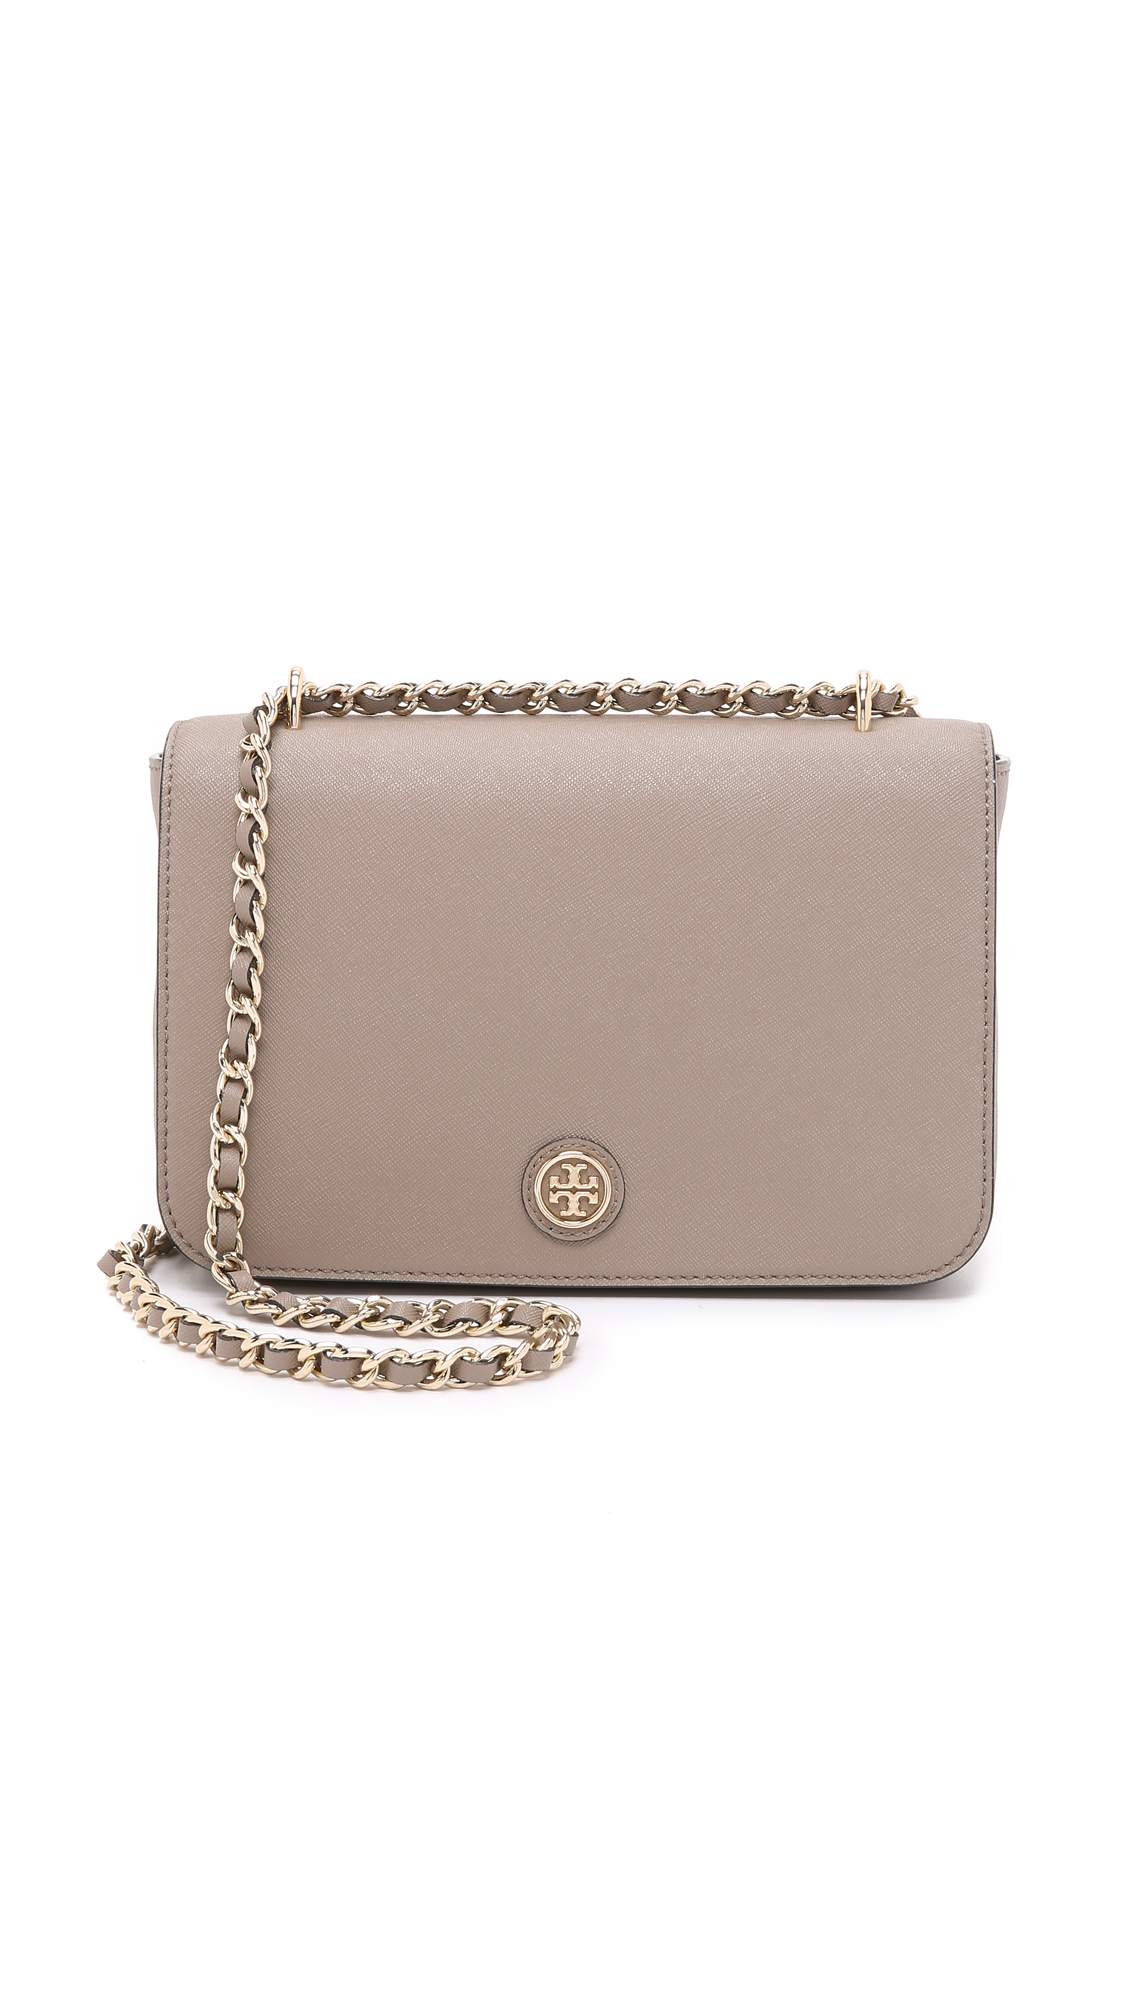 Lyst - Tory Burch Robinson Adjustable Shoulder Bag - French Gray in Gray